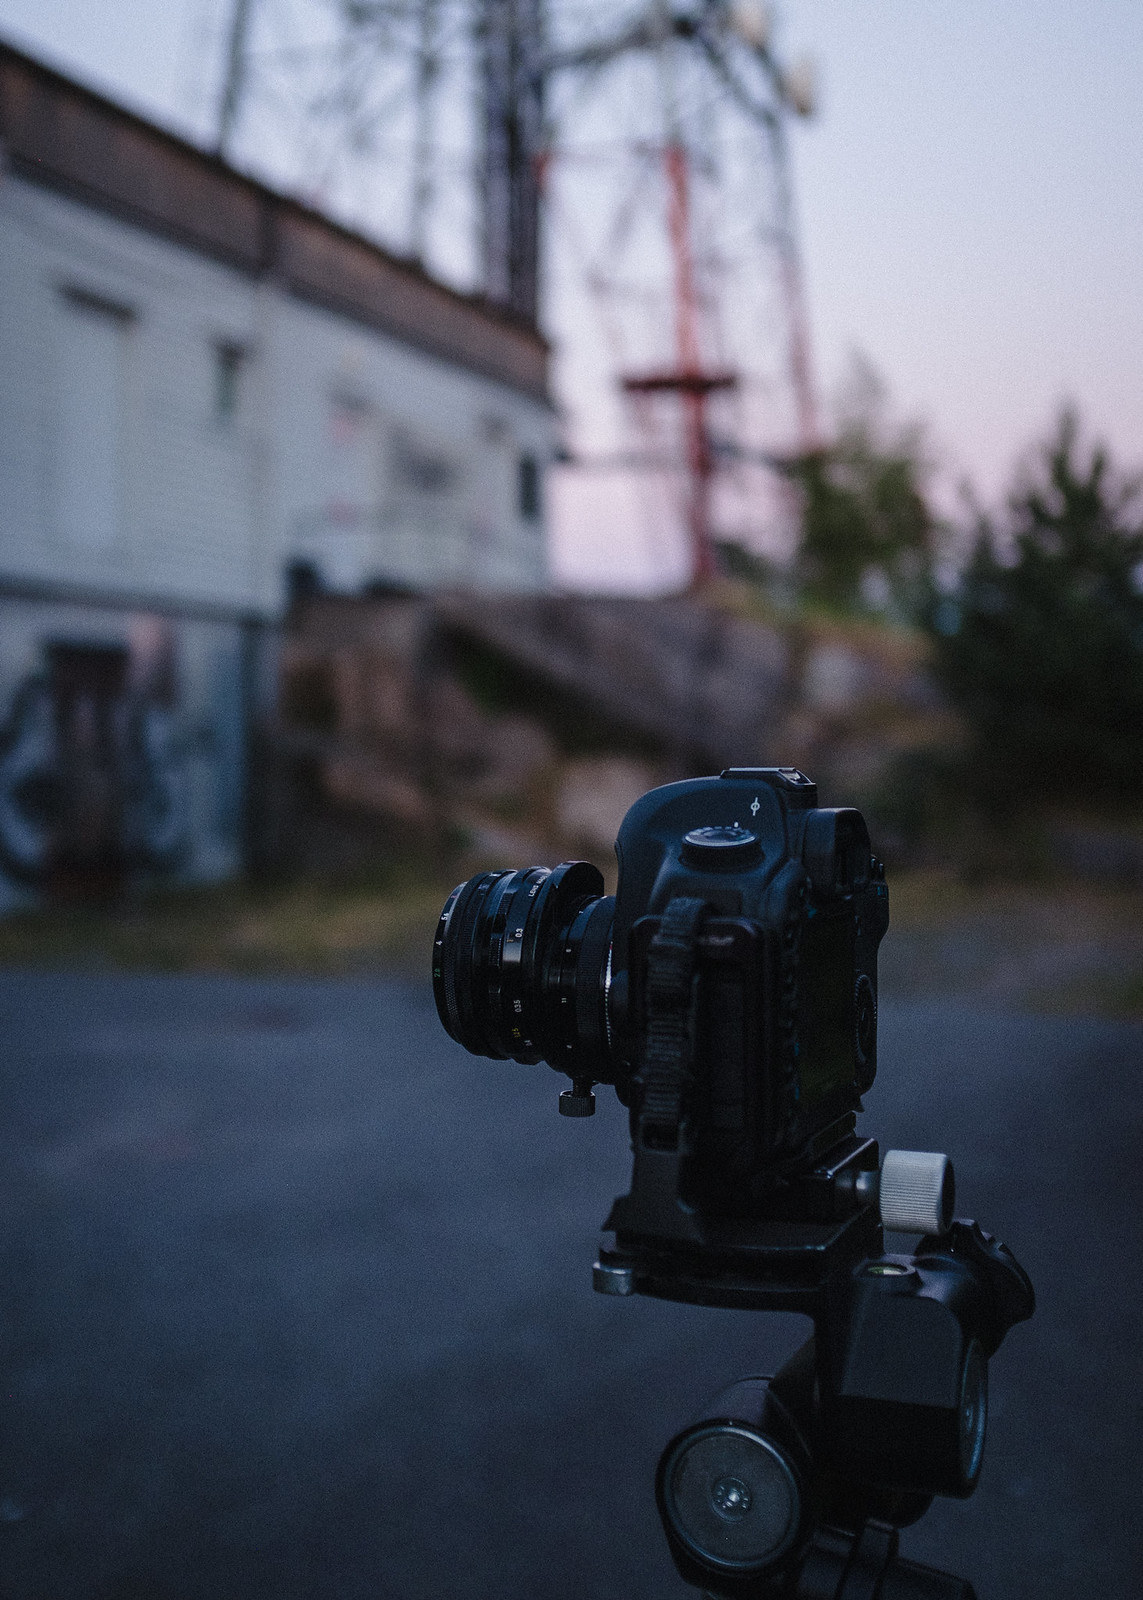 Camera on a tripod, some structures in the background.